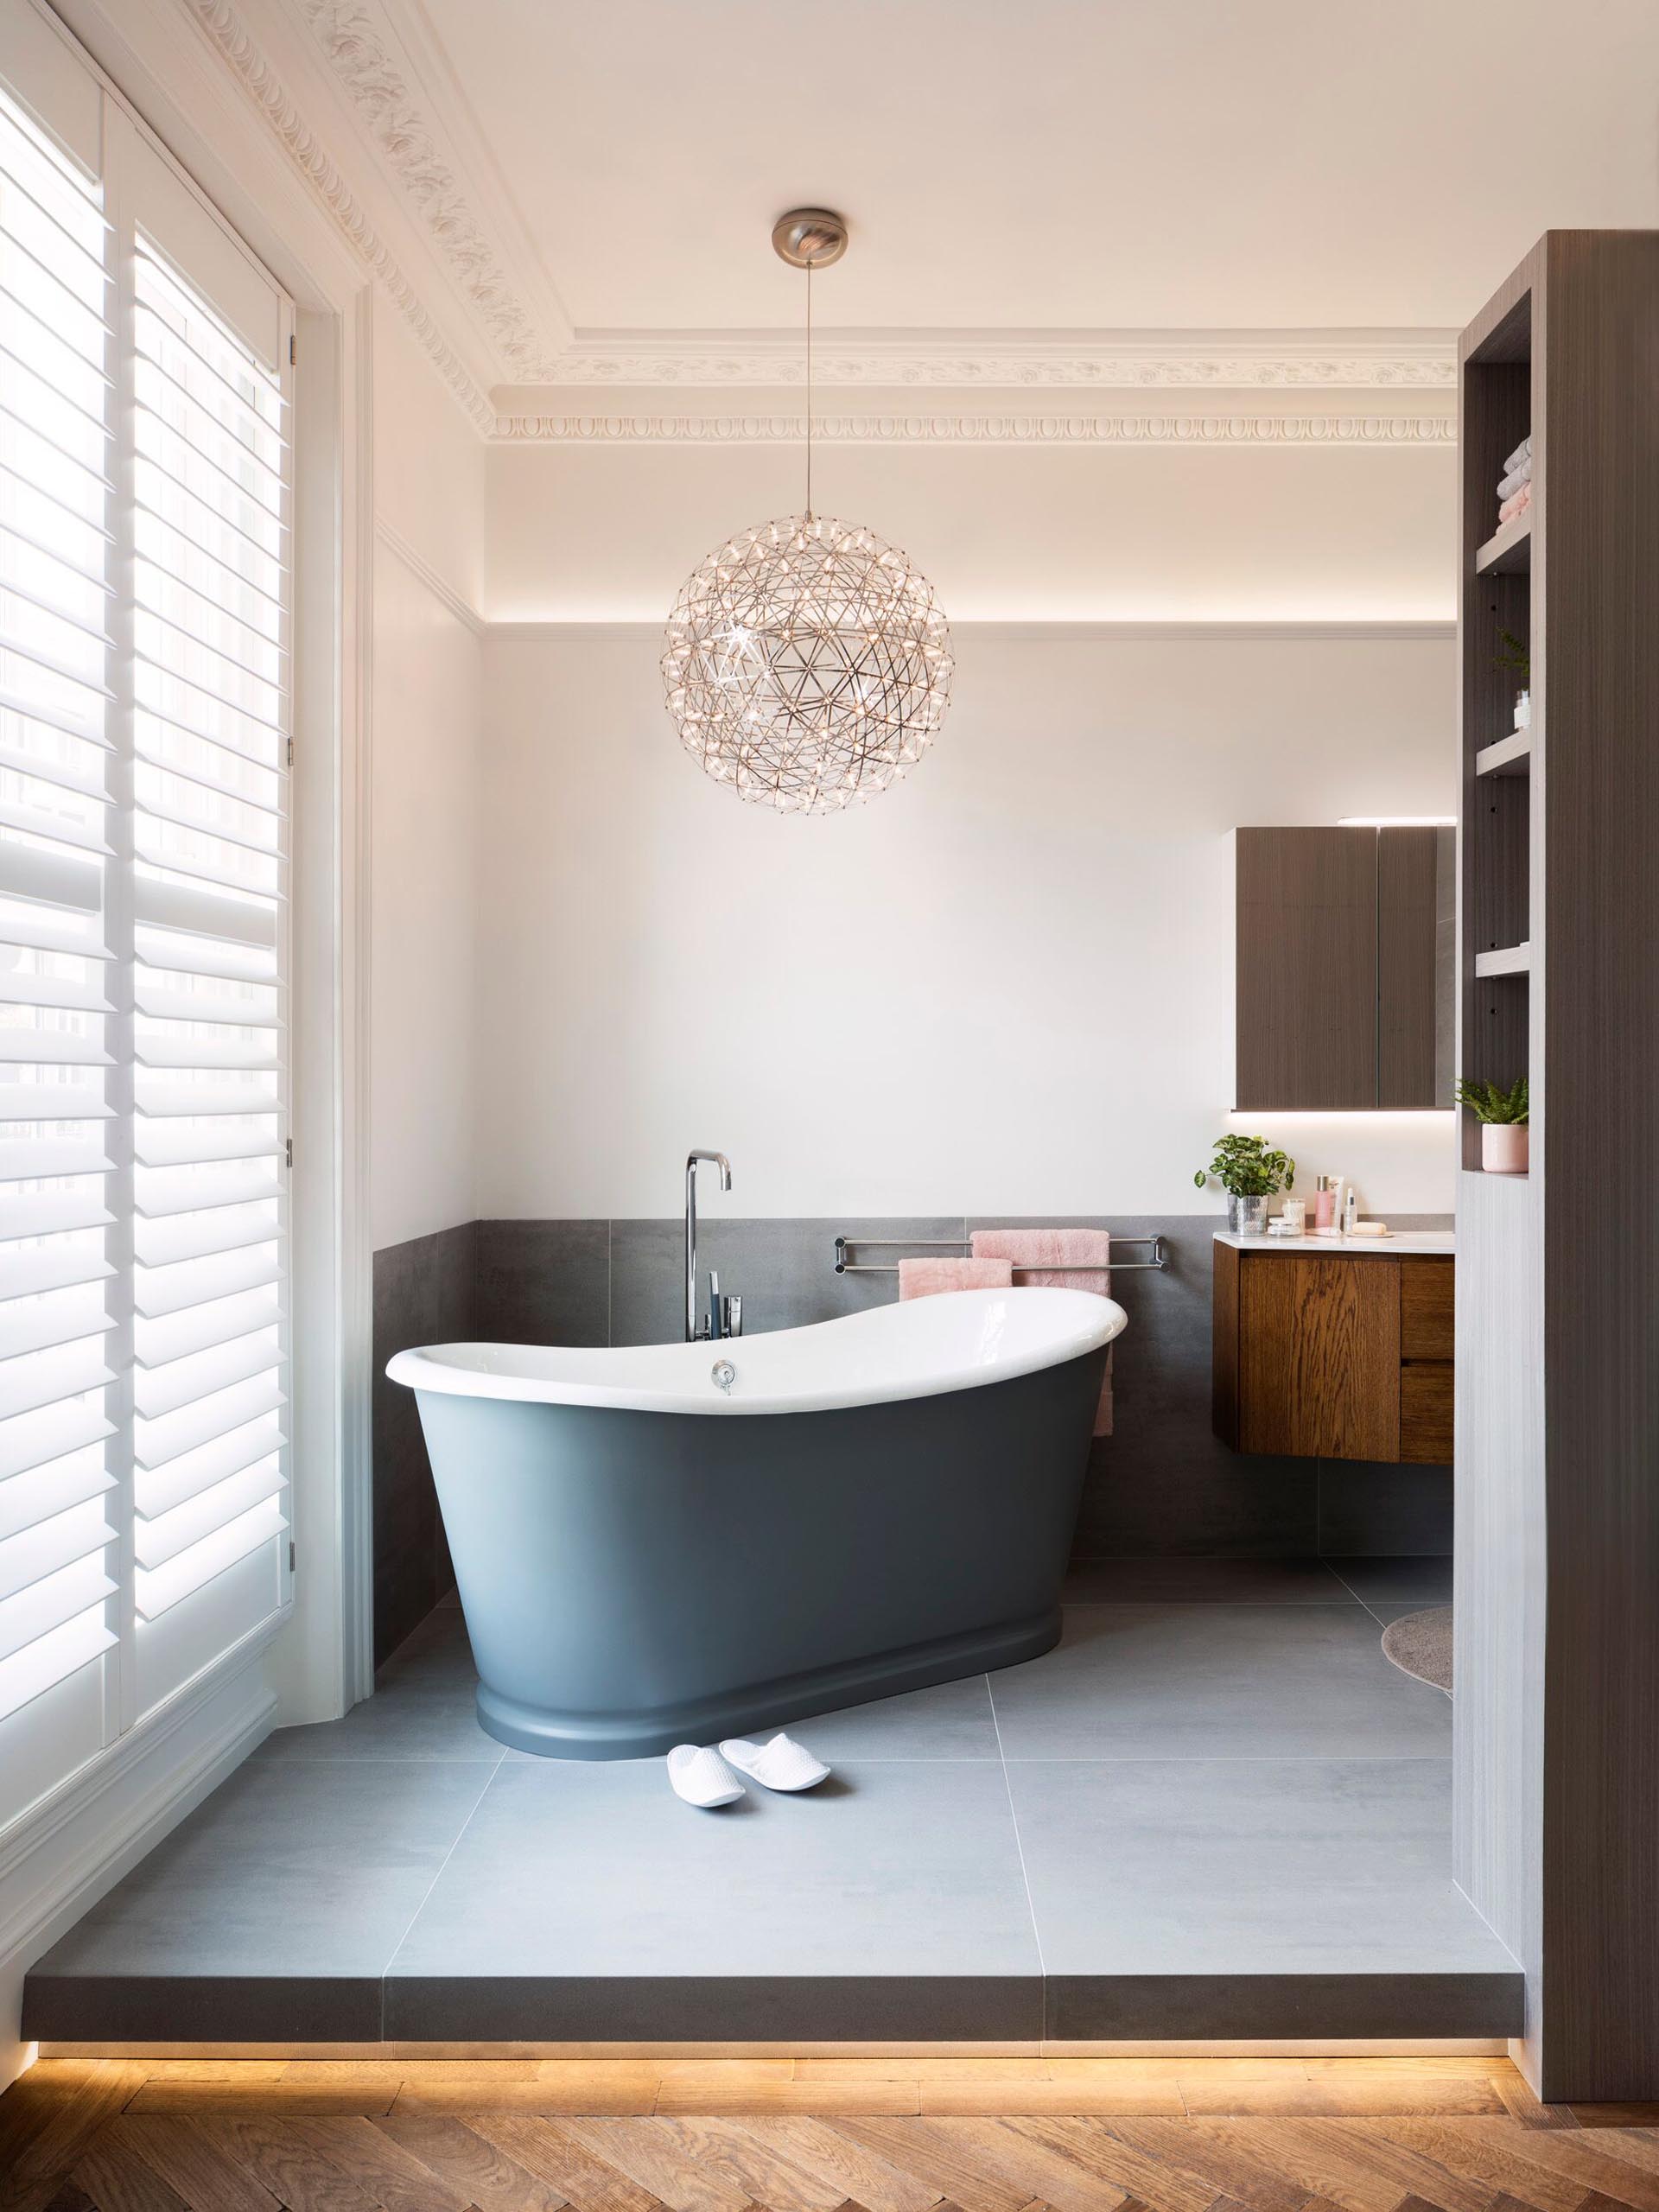 In this master bathroom, the floor has been raised is home to a freestanding bathtub and a shower with a black framed door.